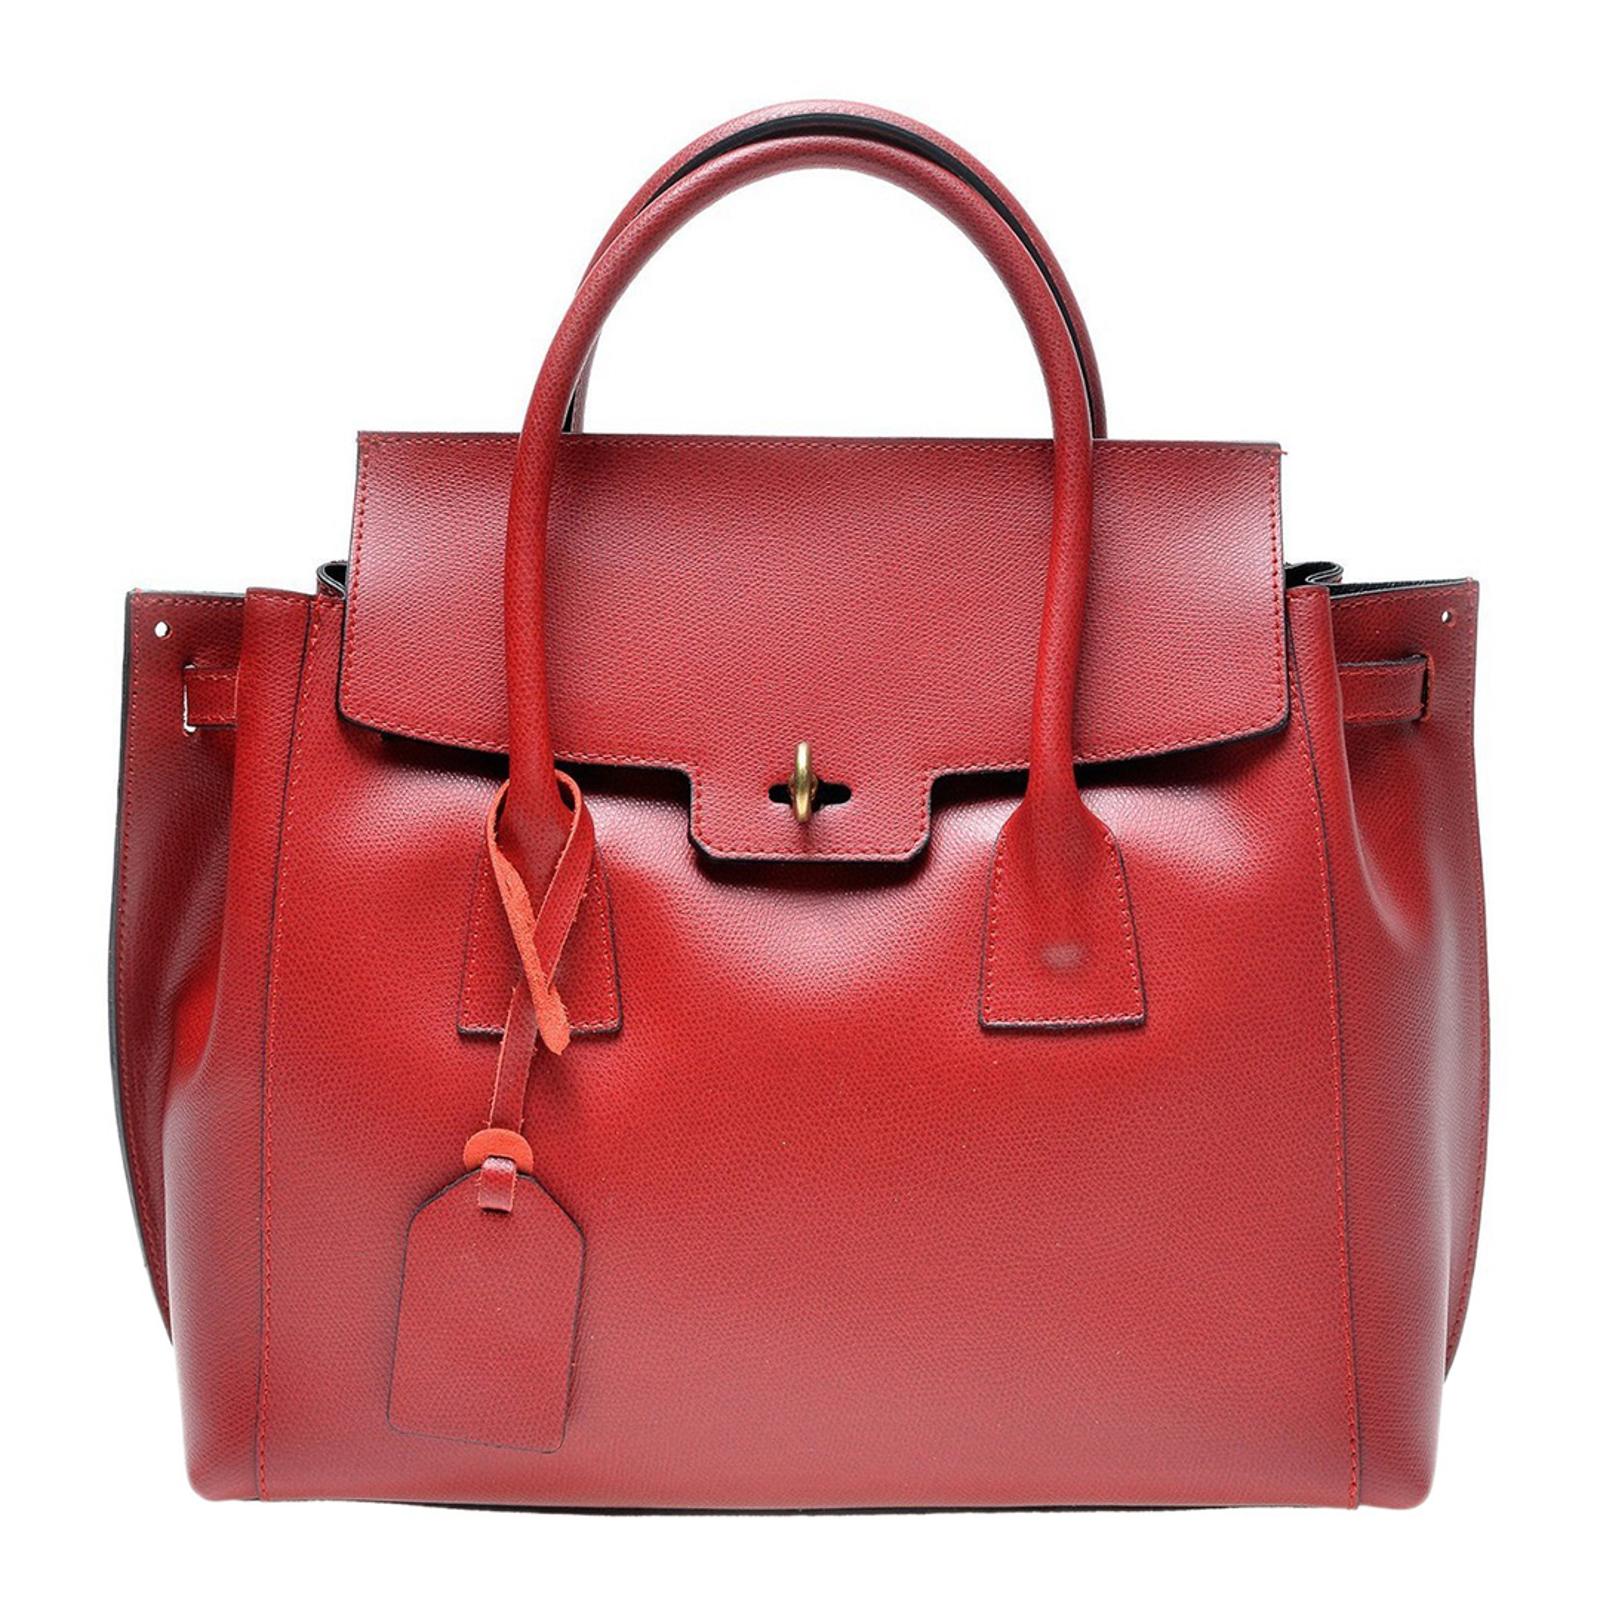 Red Italian Leather Tote Bag - BrandAlley